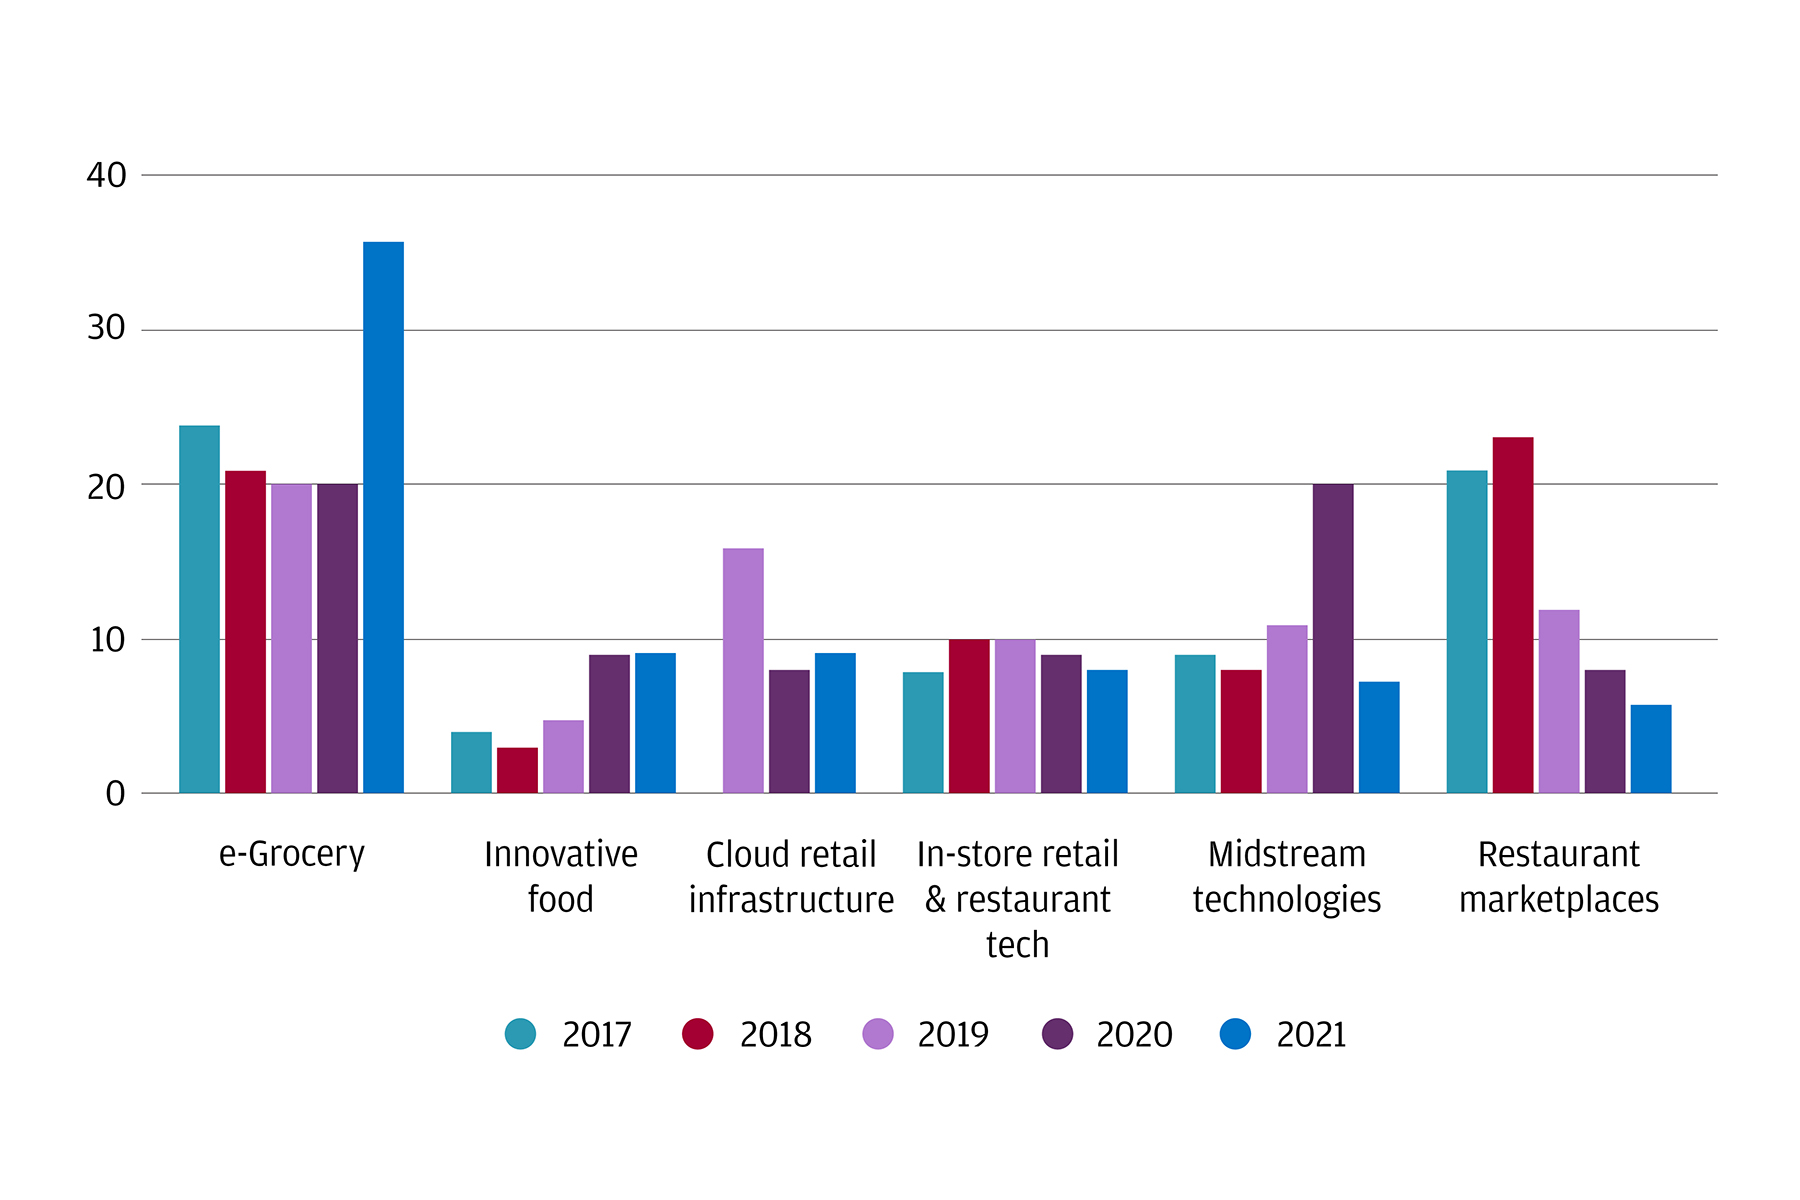 This graph describes the main annual AgriFoodTech investment by type, as a percentage of the total investment.